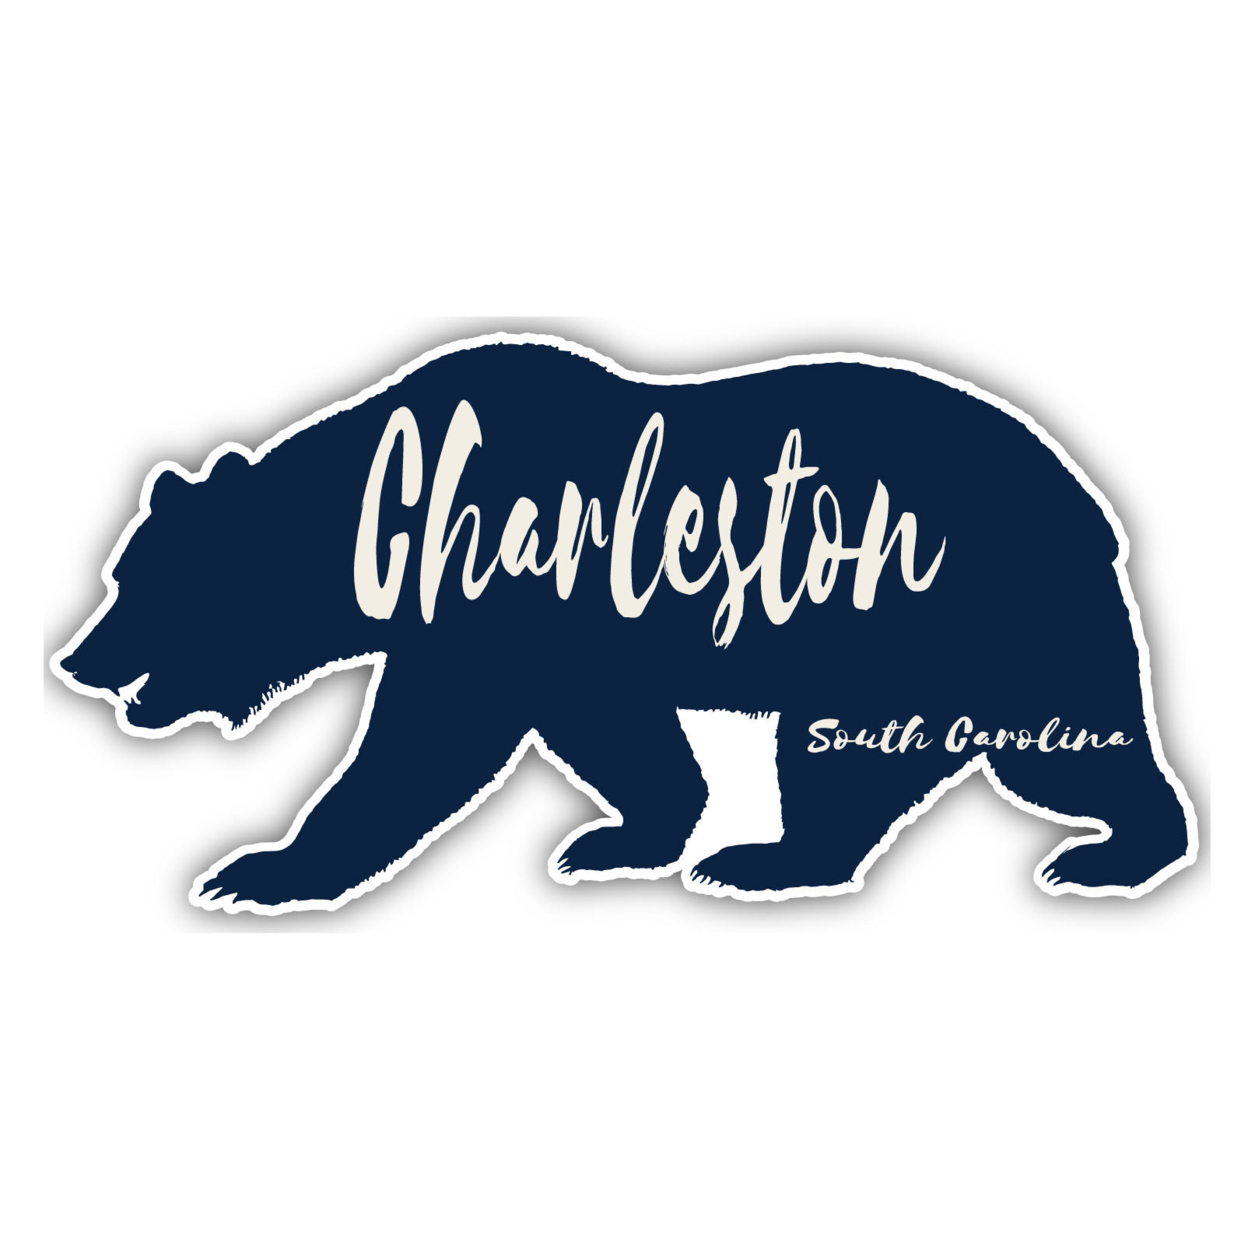 Charleston South Carolina Souvenir Decorative Stickers (Choose Theme And Size) - 4-Pack, 8-Inch, Tent